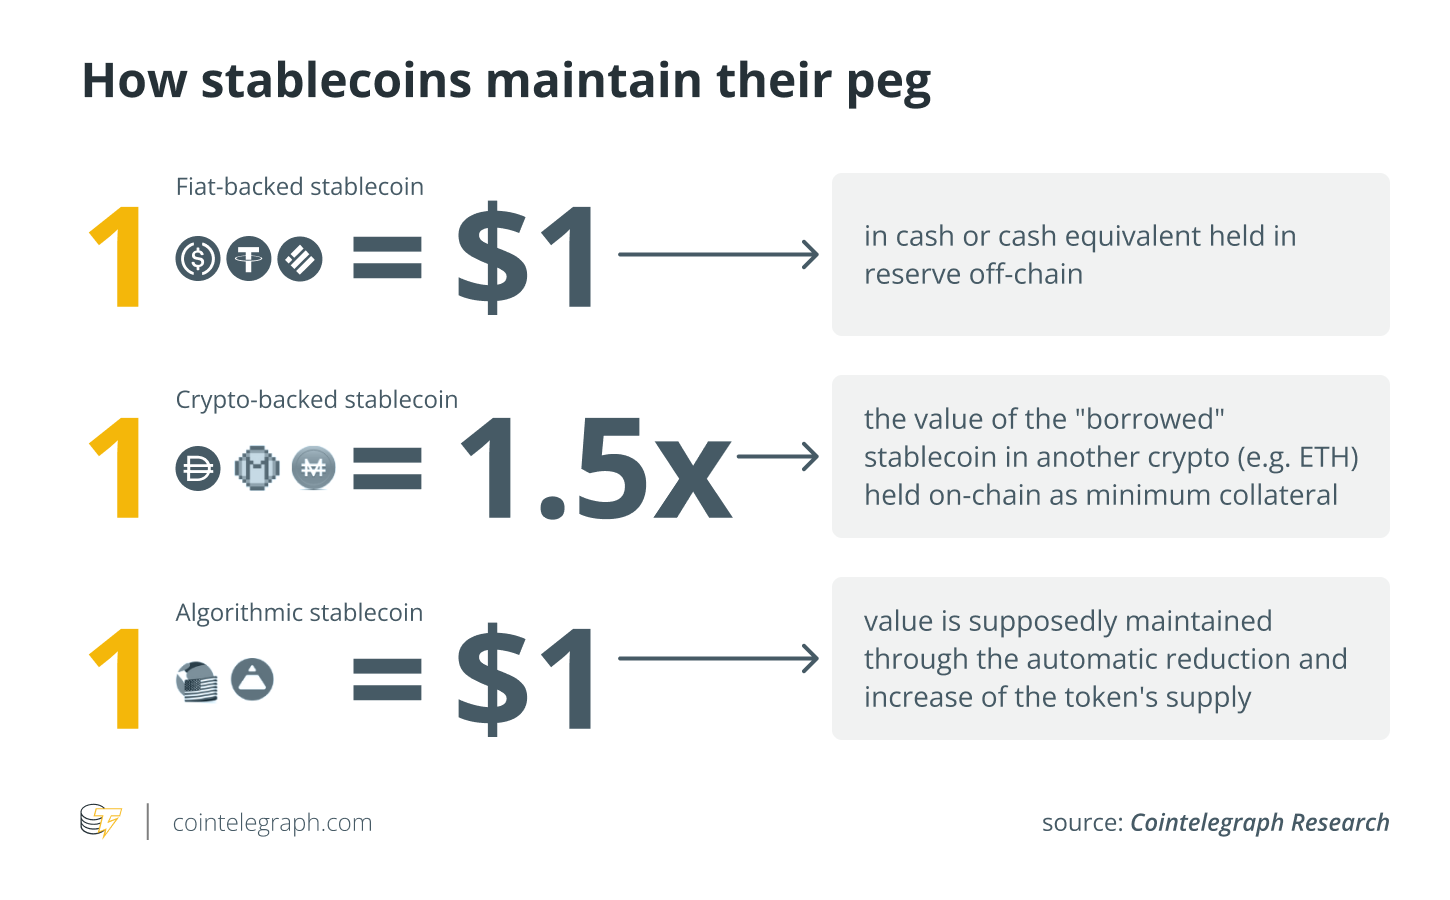 Main types of stablecoins